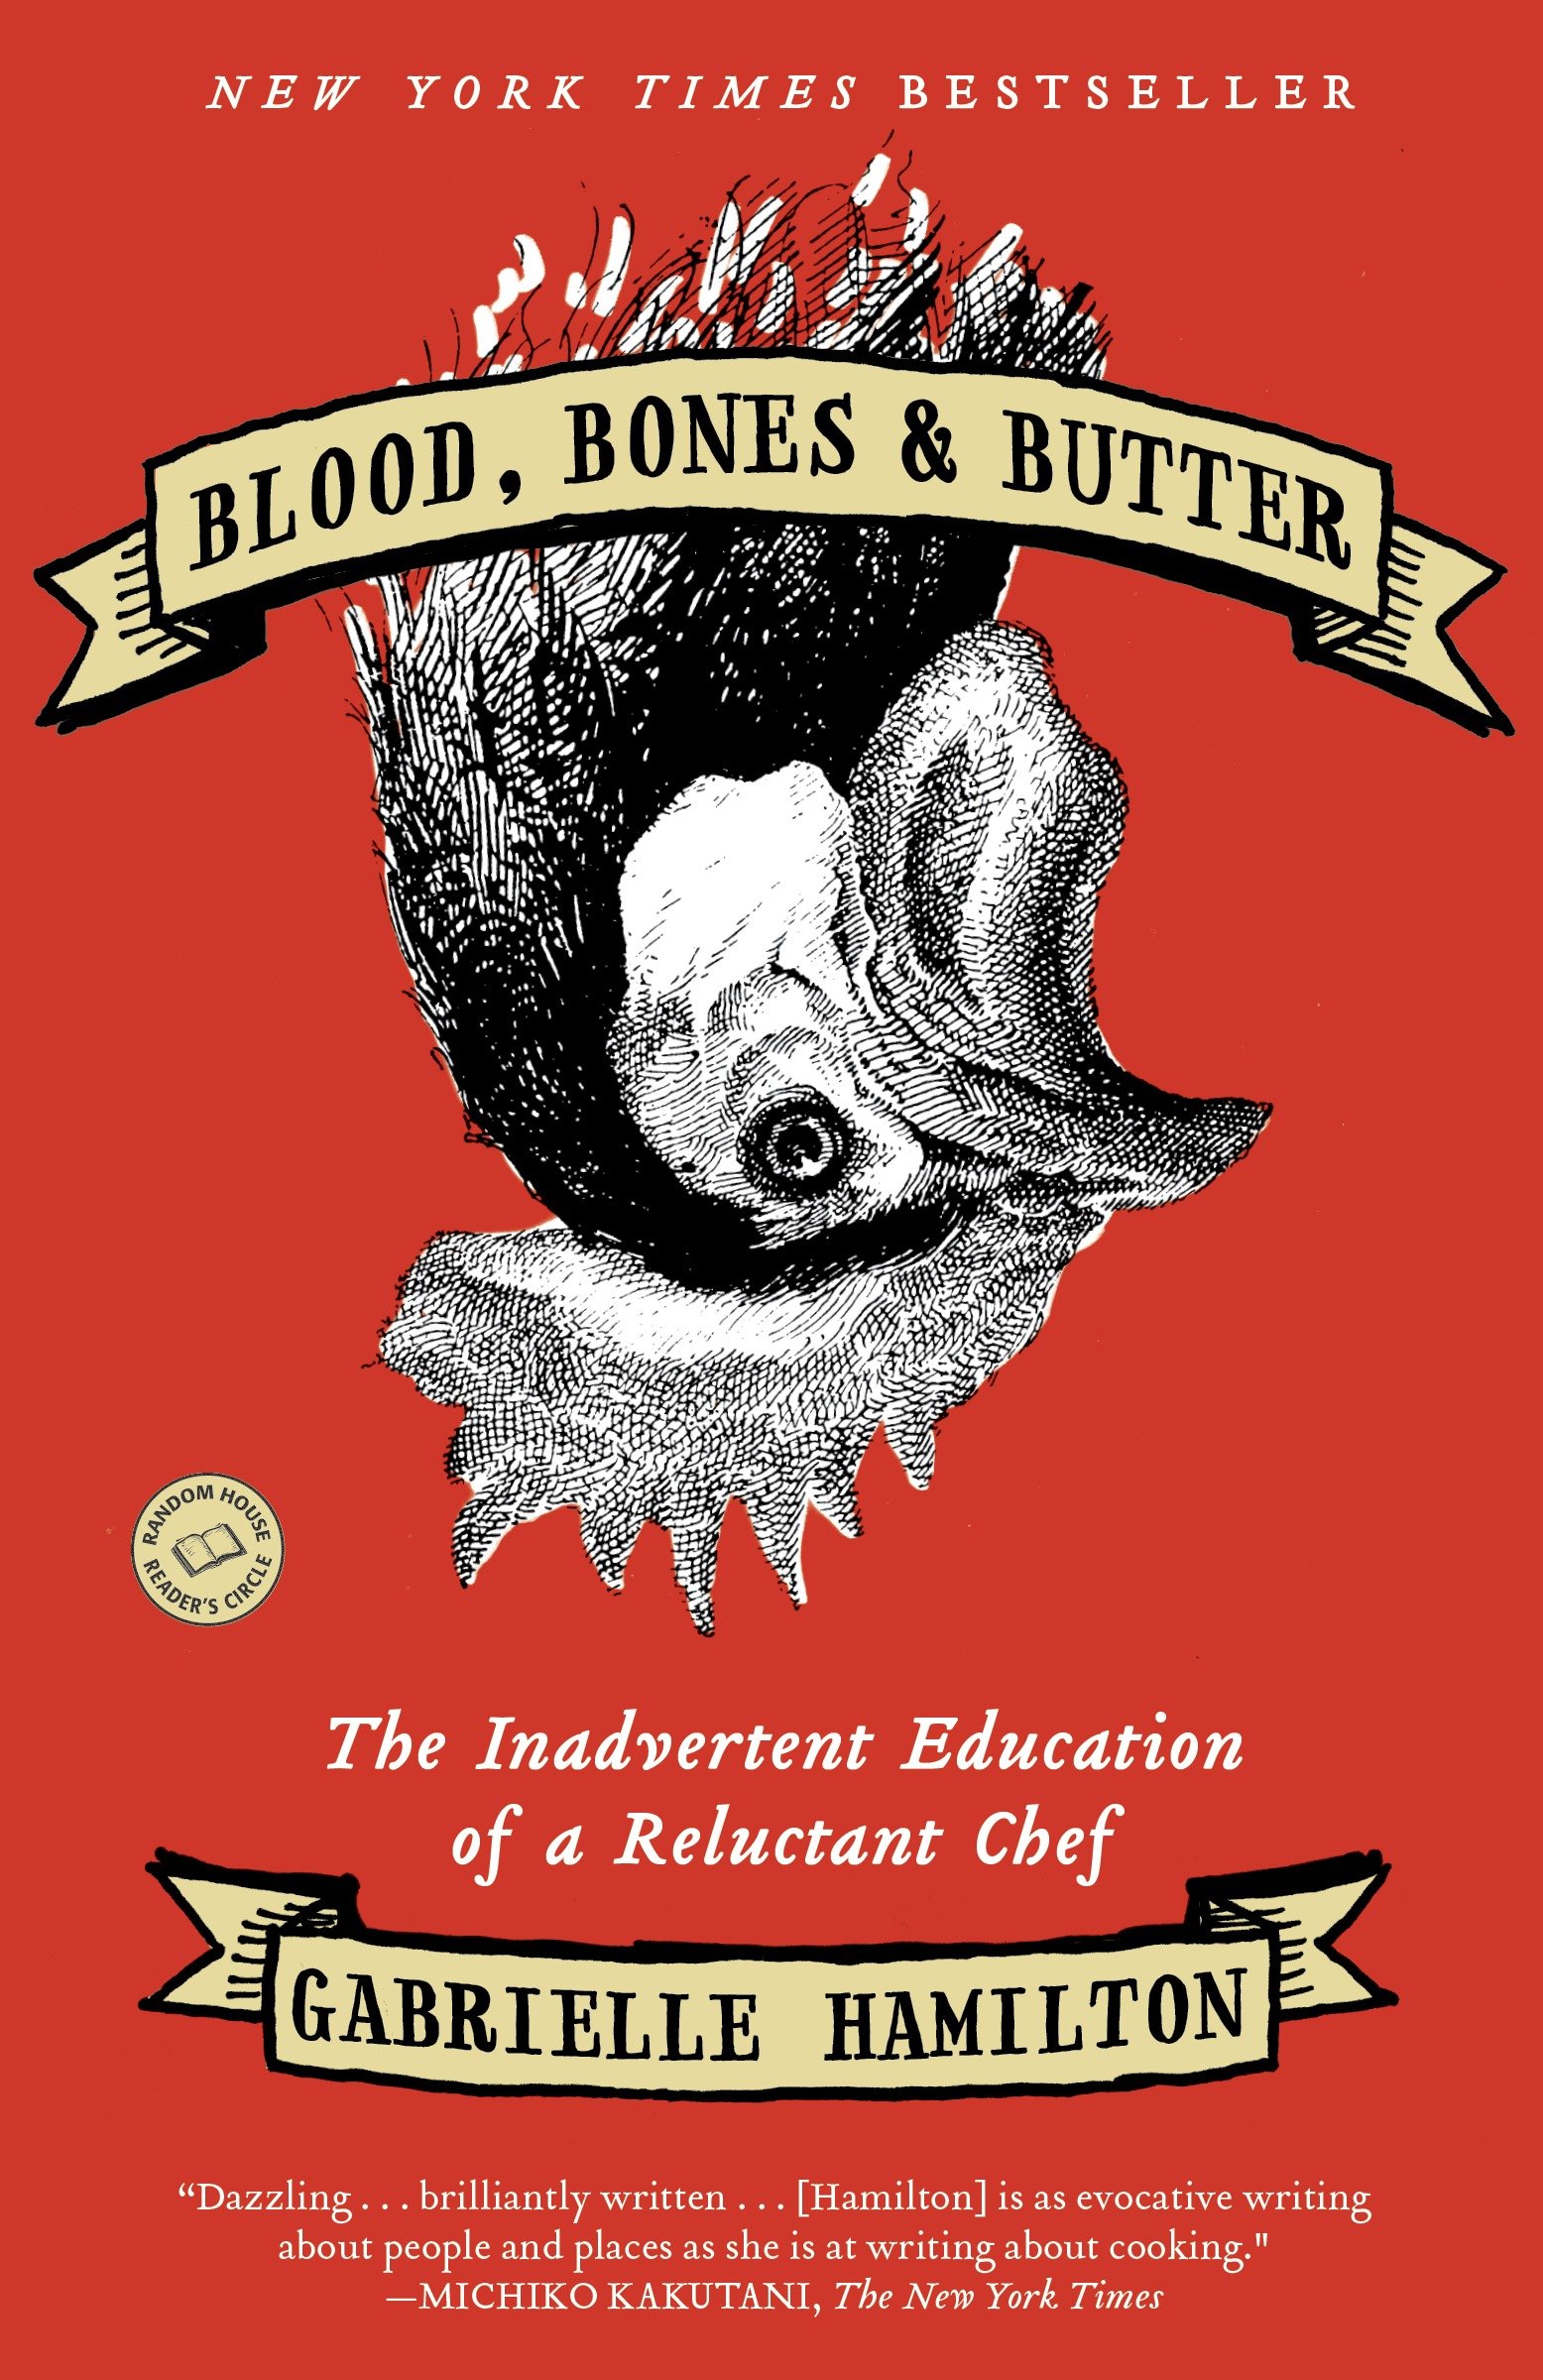 Blood, bones & butter the inadvertent education of a reluctant chef cover image